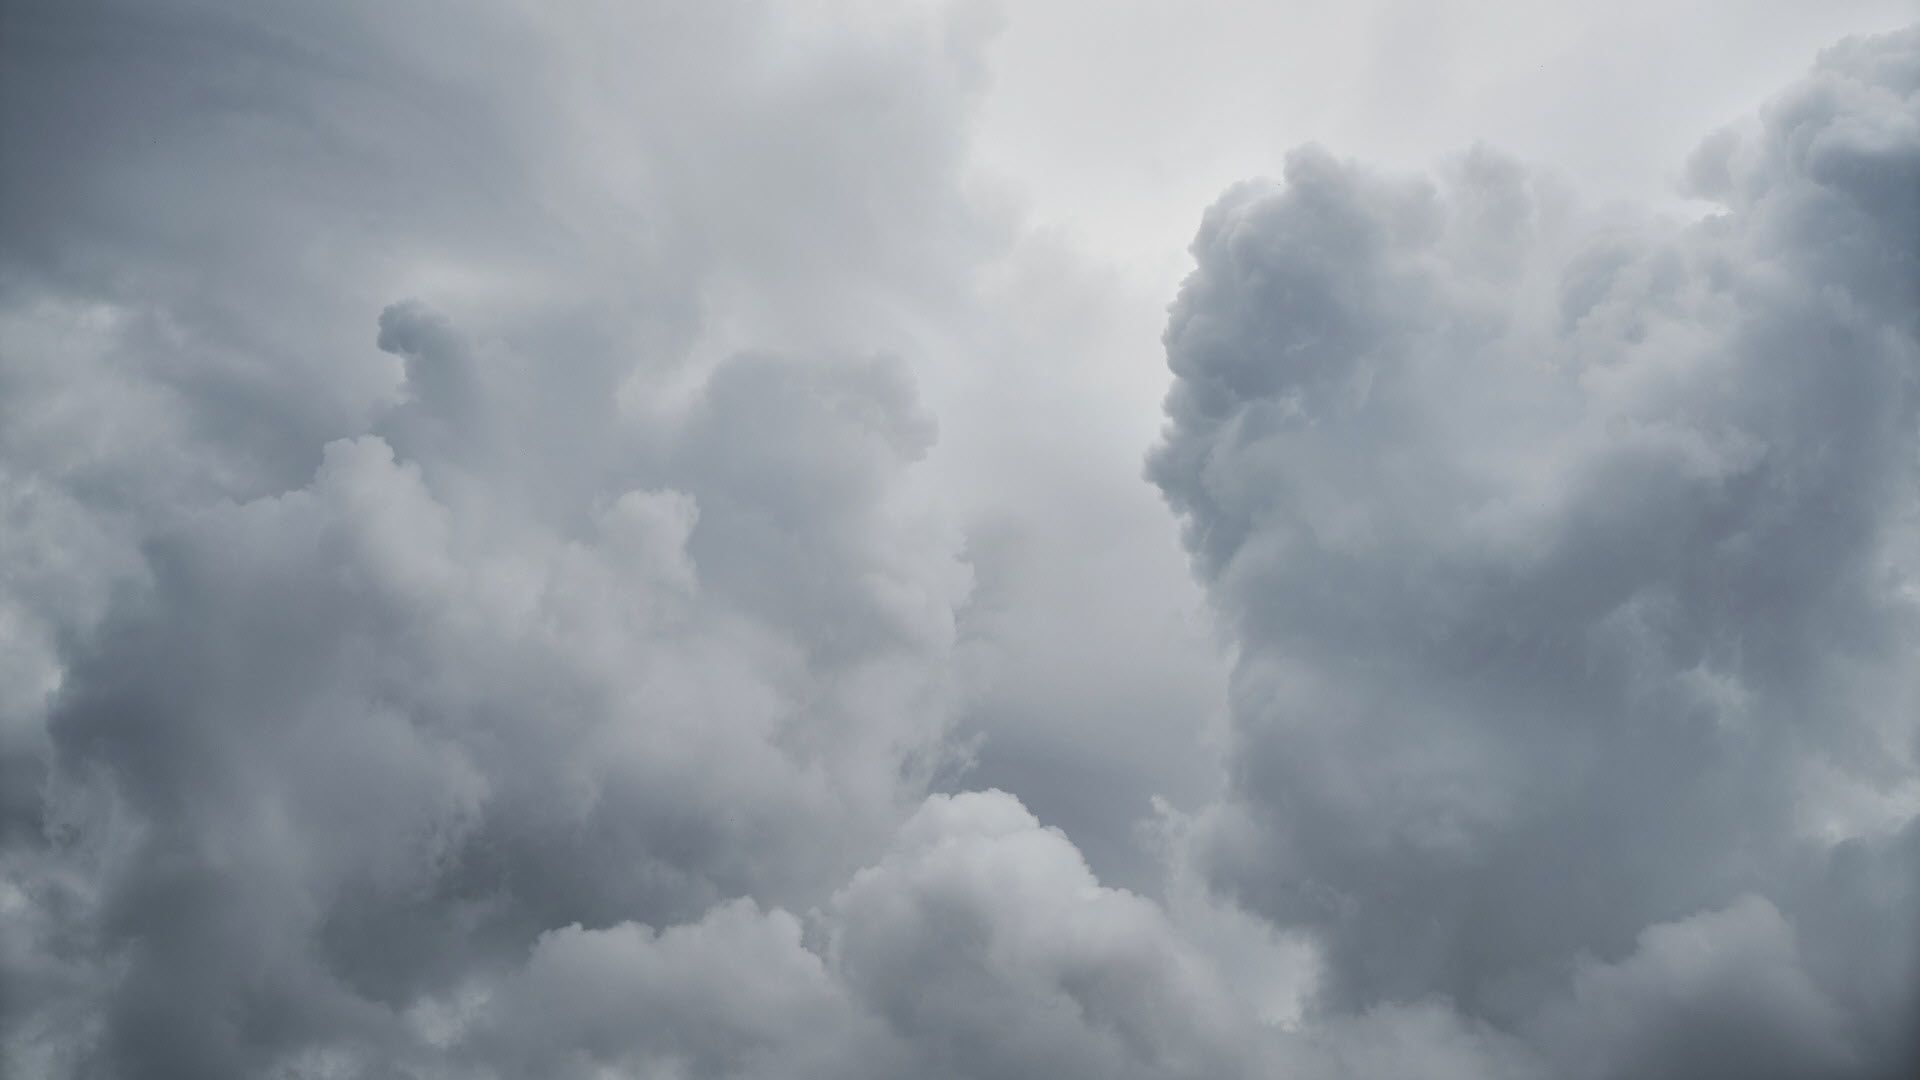 Cloudy Weather Wallpaper, HD Cloudy Weather Background on WallpaperBat